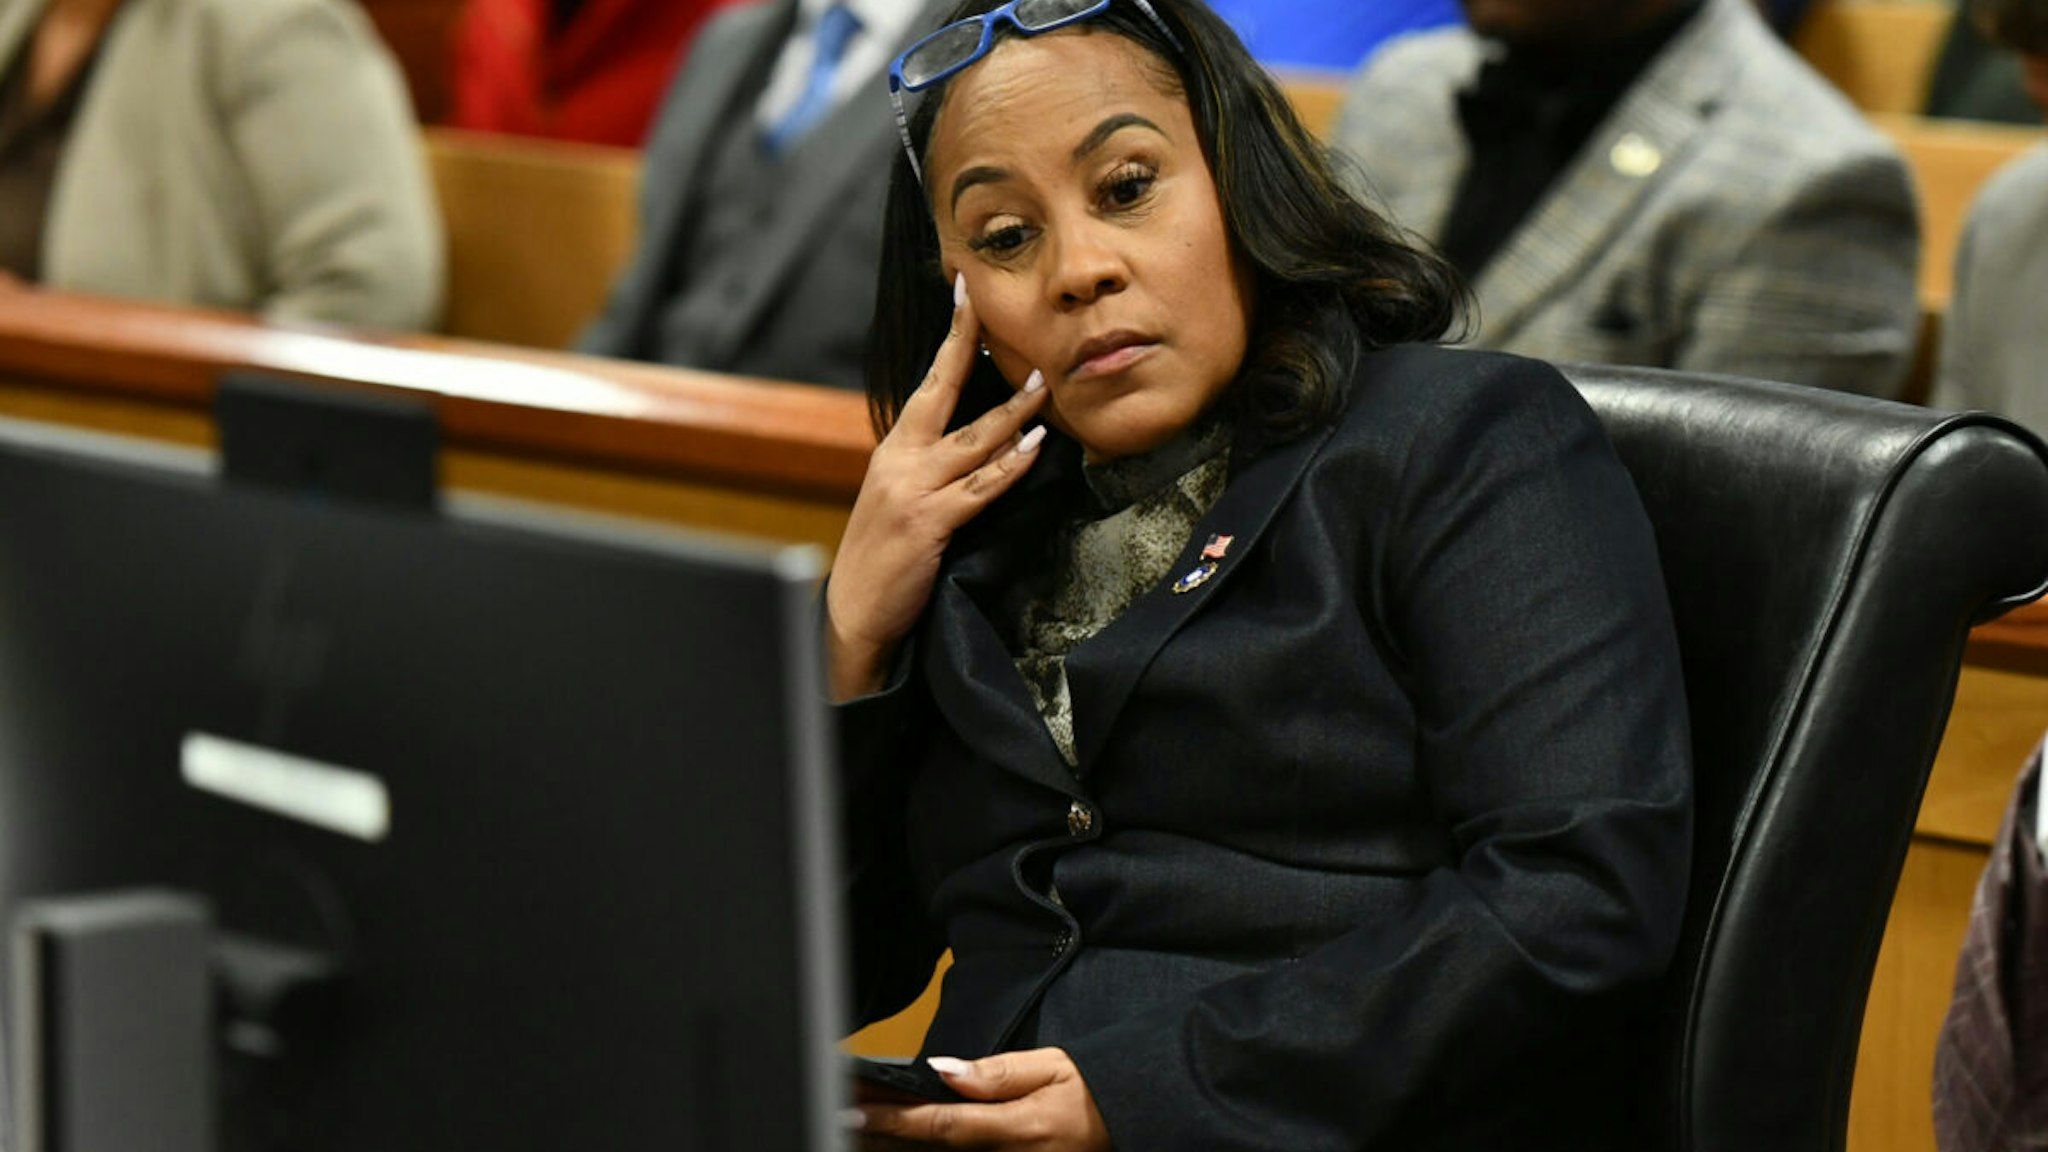 ATLANTA, GEORGIA - NOVEMBER 21: Fulton County District Attorney Fani Willis appears before Judge Scott McAfee for a hearing in the 2020 Georgia election interference case at the Fulton County Courthouse on November 21, 2023 in Atlanta, Georgia. Judge McAfee heard arguments as to whether co-defendant Harrison Floyd should be sent to jail for social media posts and comments that potentially targeted witnesses in the trial. McAfee declined to revoke Floyd's bond. Floyd was charged along with former US President Donald Trump and 17 others in an indictment that accuses them of illegally conspiring to subvert the will of Georgia voters in the 2020 presidential election.